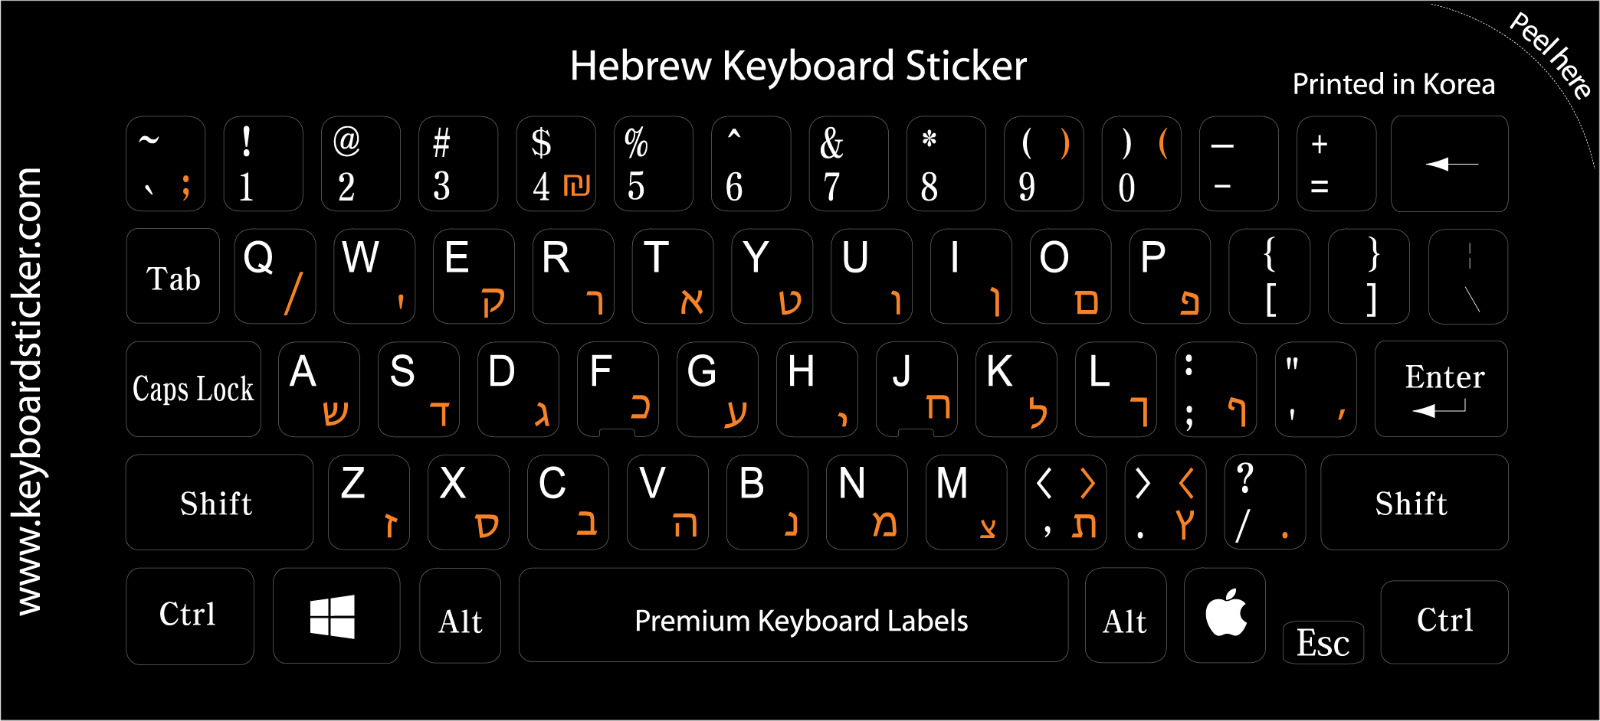 Hebrew Transparent Keyboard Sticker 6 colors Available Best Quaility 